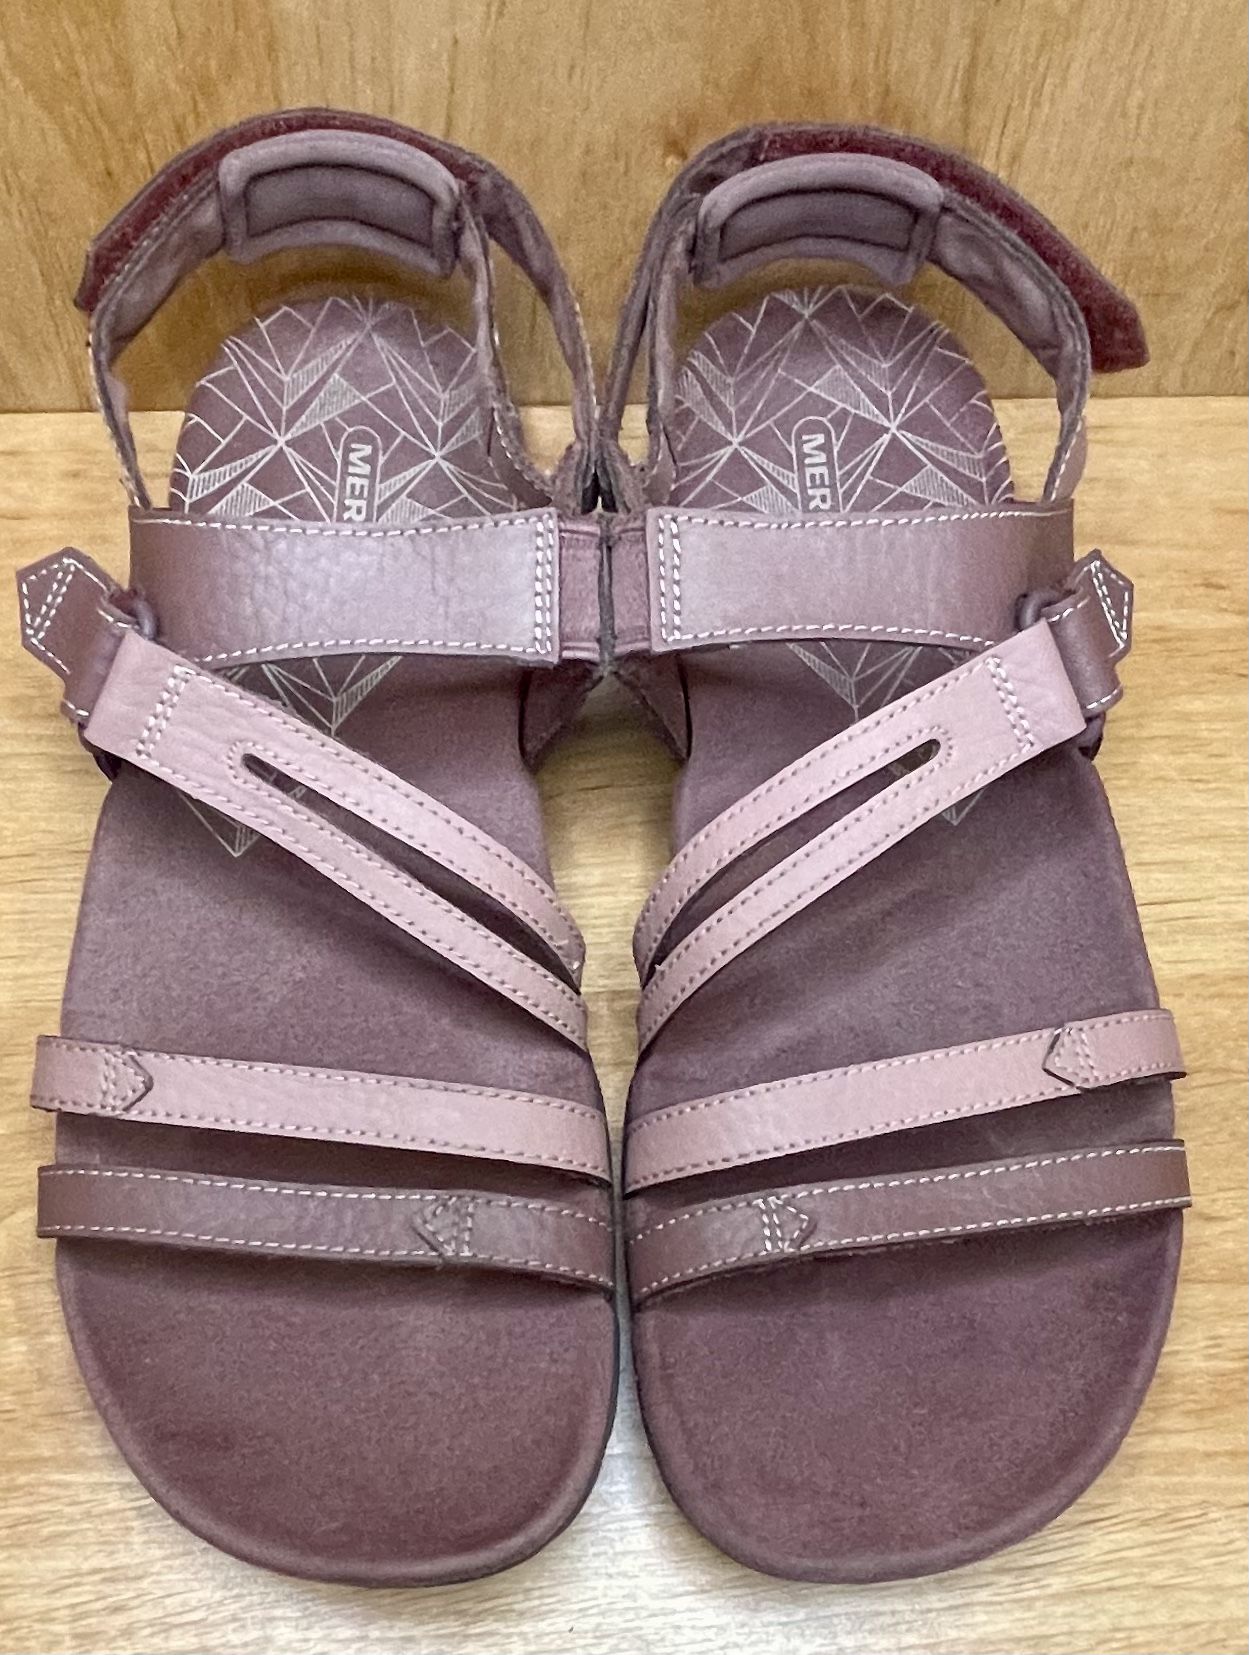 Merrell Leather Sandals Women’s Size 8